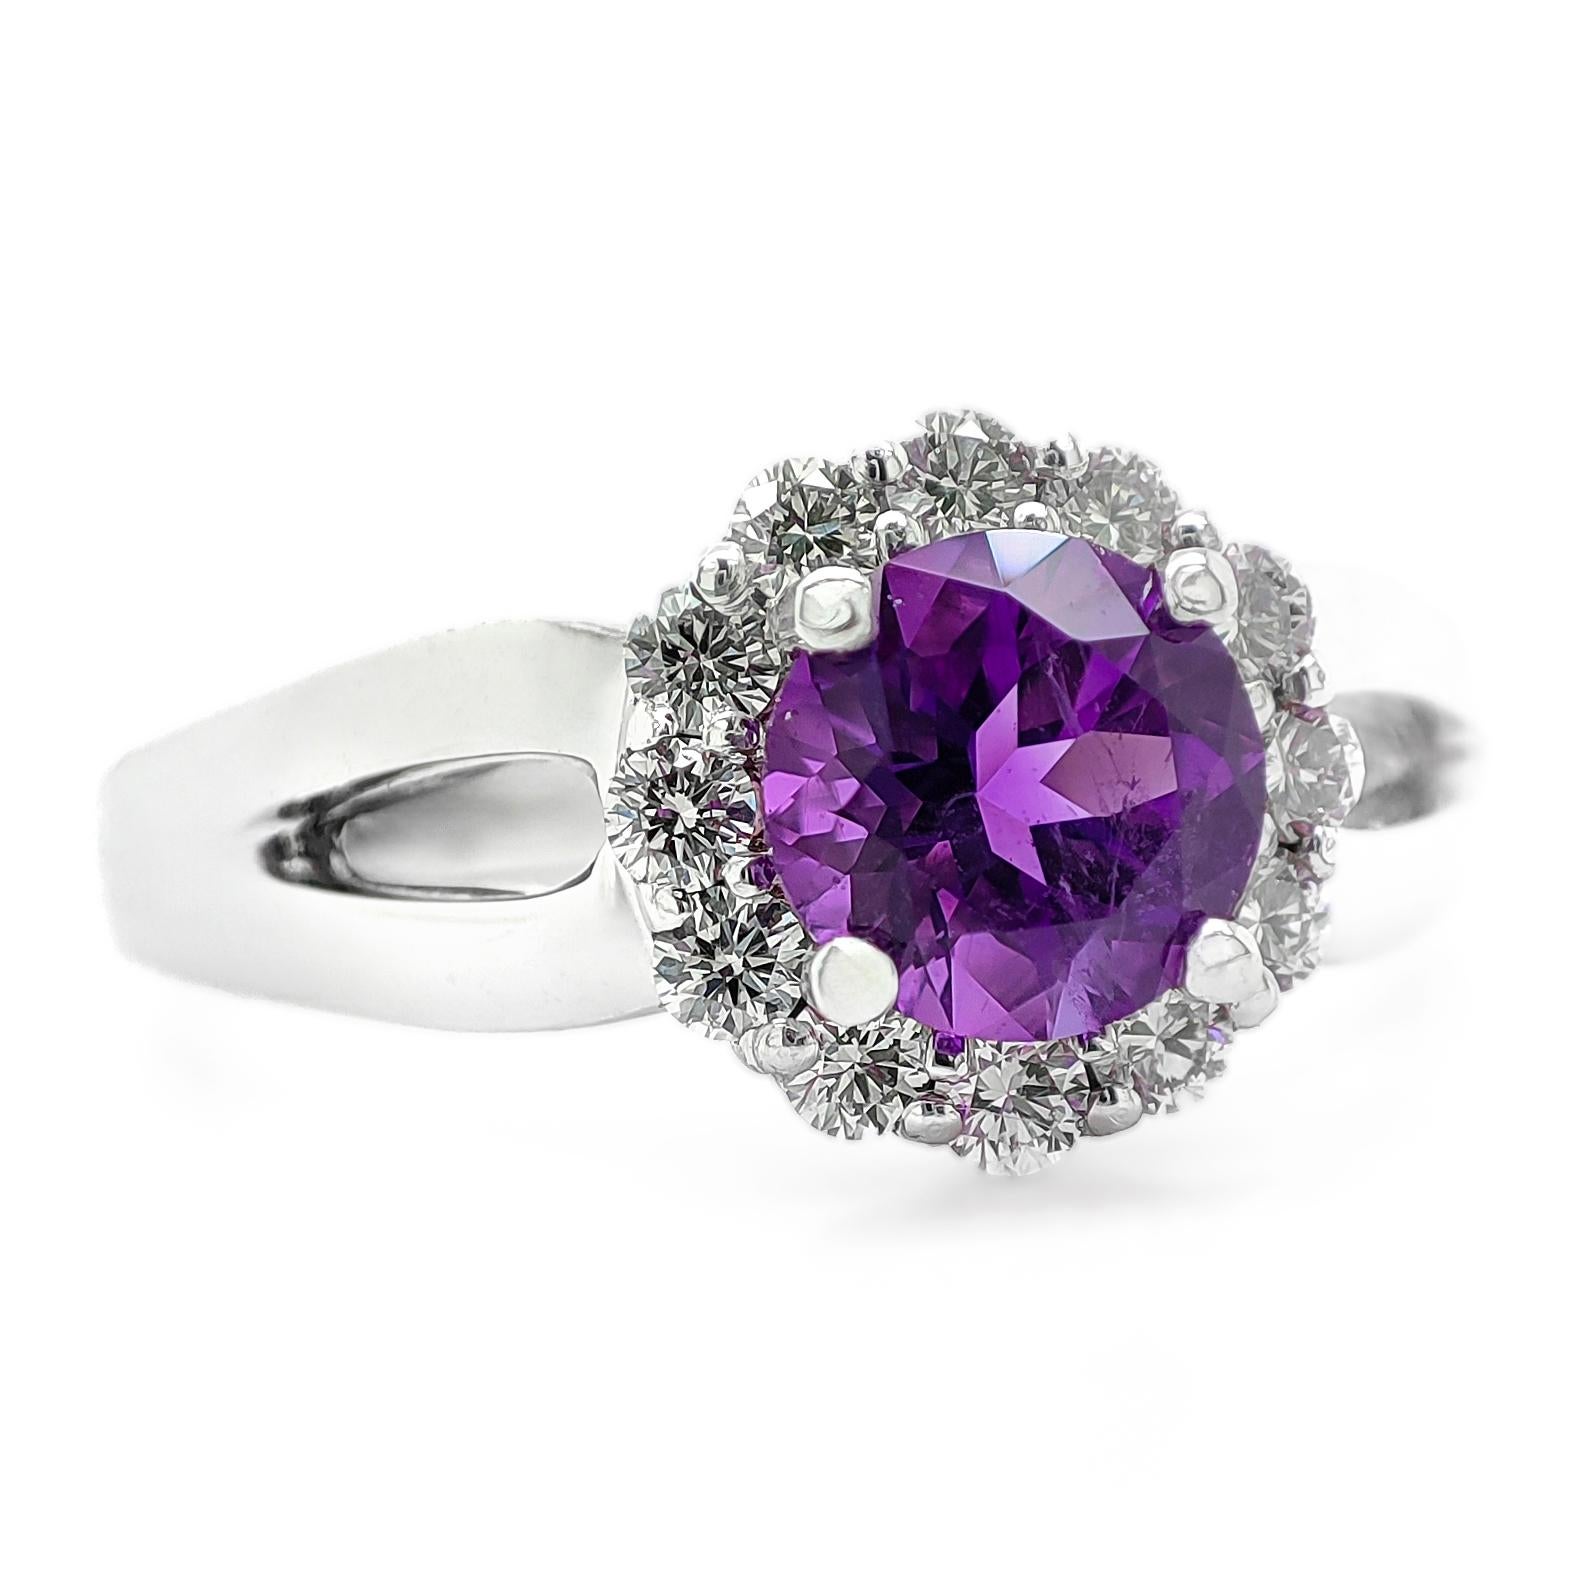 FOR US BUYER NO VAT

This beautiful piece features a 0.72 carat purple quartz as its centerpiece, adding a captivating burst of color to its design.

Enhancing the allure of the quartz are 12 diamonds, totaling 0.30 carats. These diamonds exhibit a